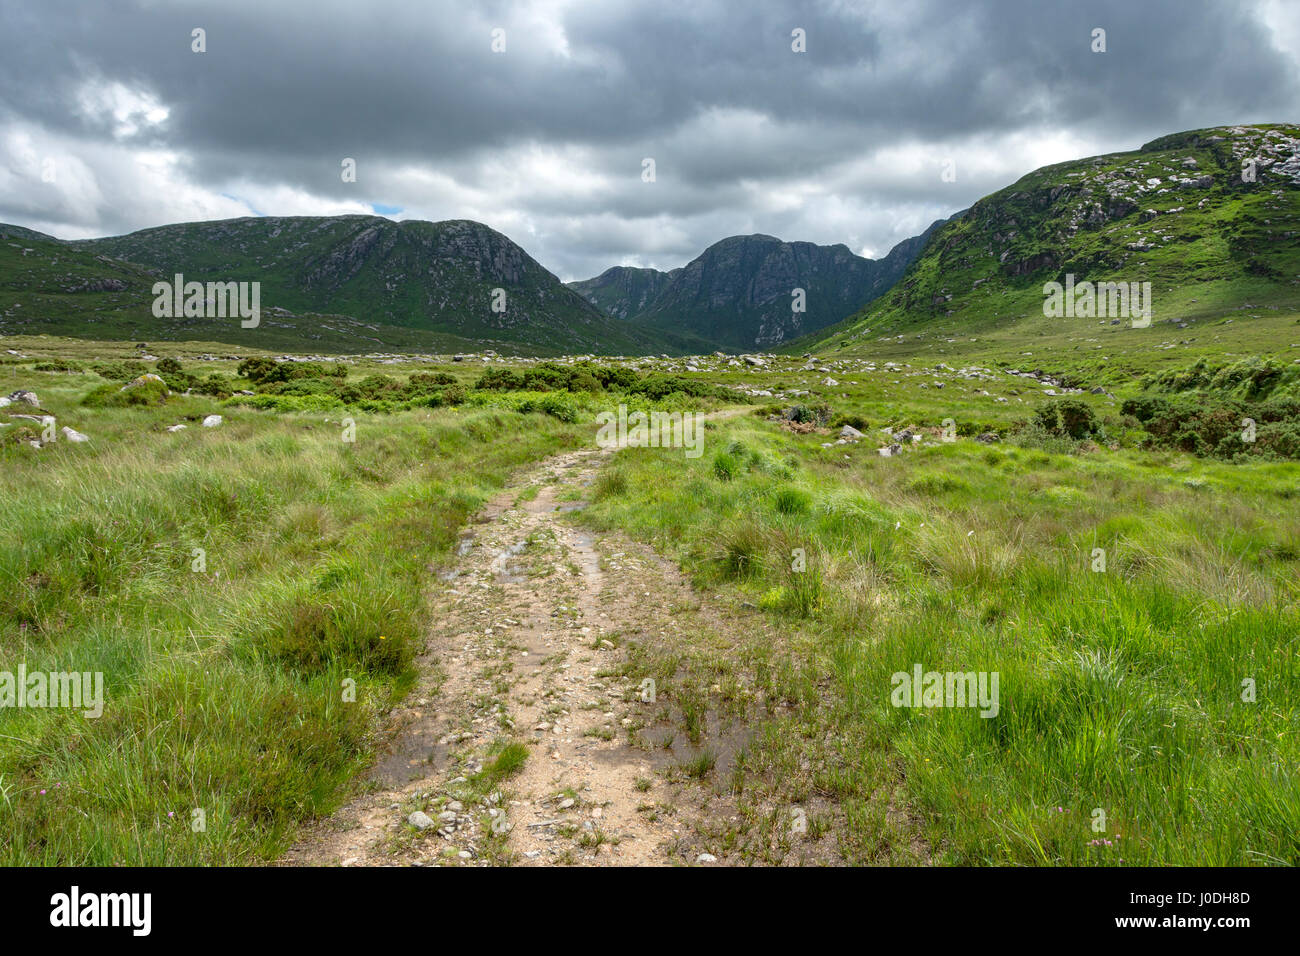 Track leading into the Poisoned Glen with the peak of Crockfadda in the distance, Derryveagh Mountains, County Donegal, Ireland Stock Photo